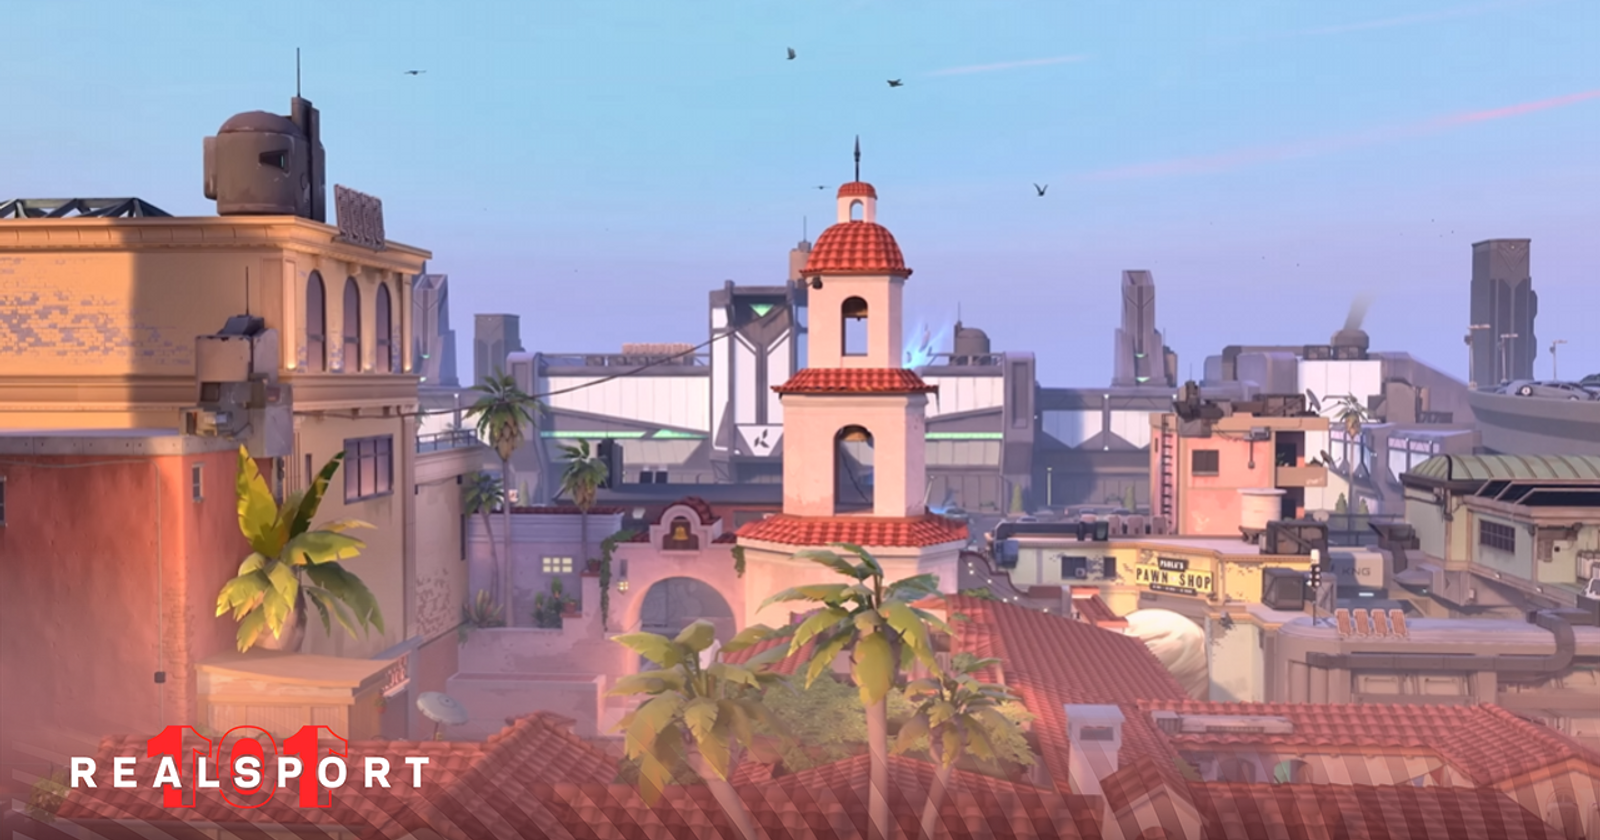 Valorant Sunset Map: Best agents and team comps